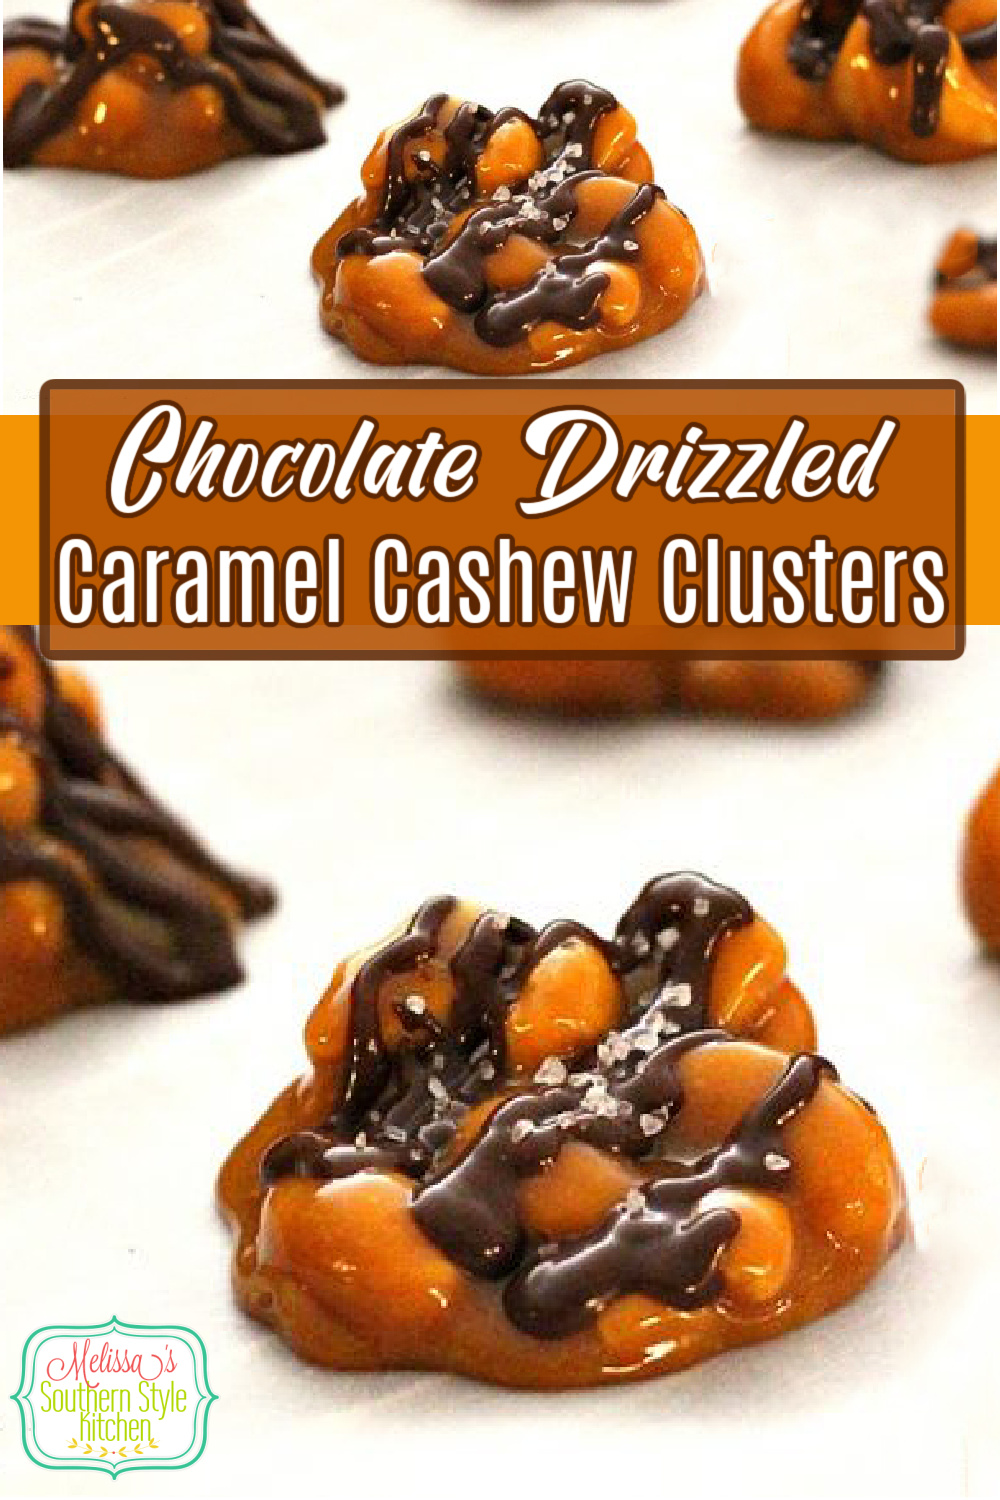 These Chocolate Drizzled Caramel Cashew Clusters are chewy and irresistible #cashewclusters #chocolate #caramelcashewclusters #candyrecipes #caramel #cashews #cashewcandy #holidays #holidaysweets #southernrecipes #southernfood